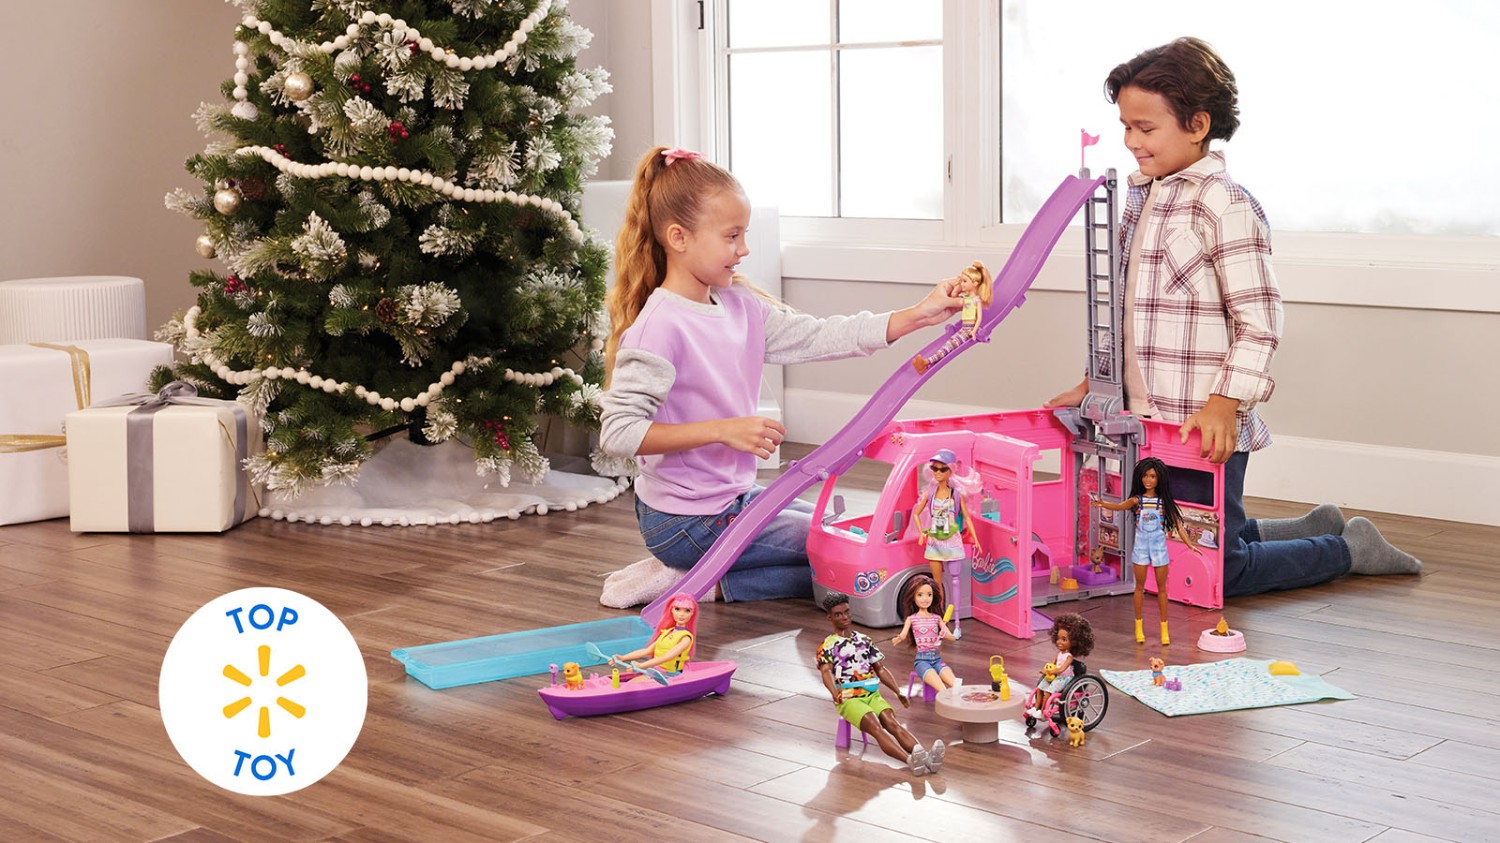 The 32 hottest toys to gift for Christmas 2022, per experts